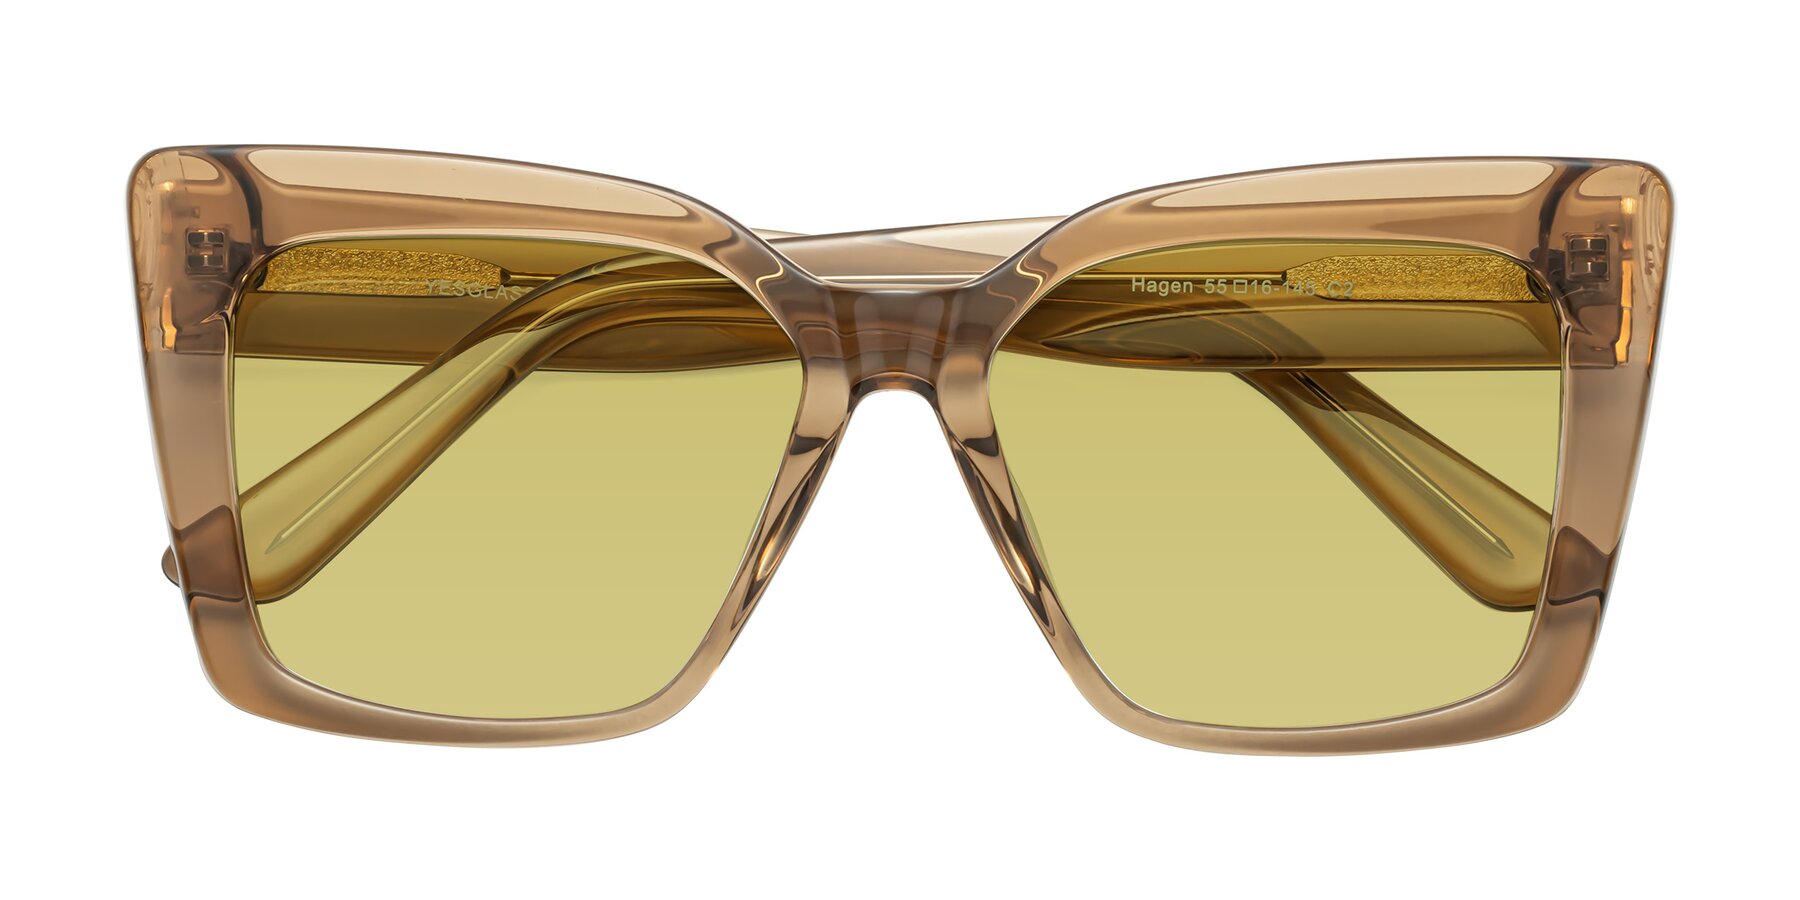 Translucent Brown Oversized Acetate Butterfly Tinted Sunglasses with Medium  Champagne Sunwear Lenses - Hagen